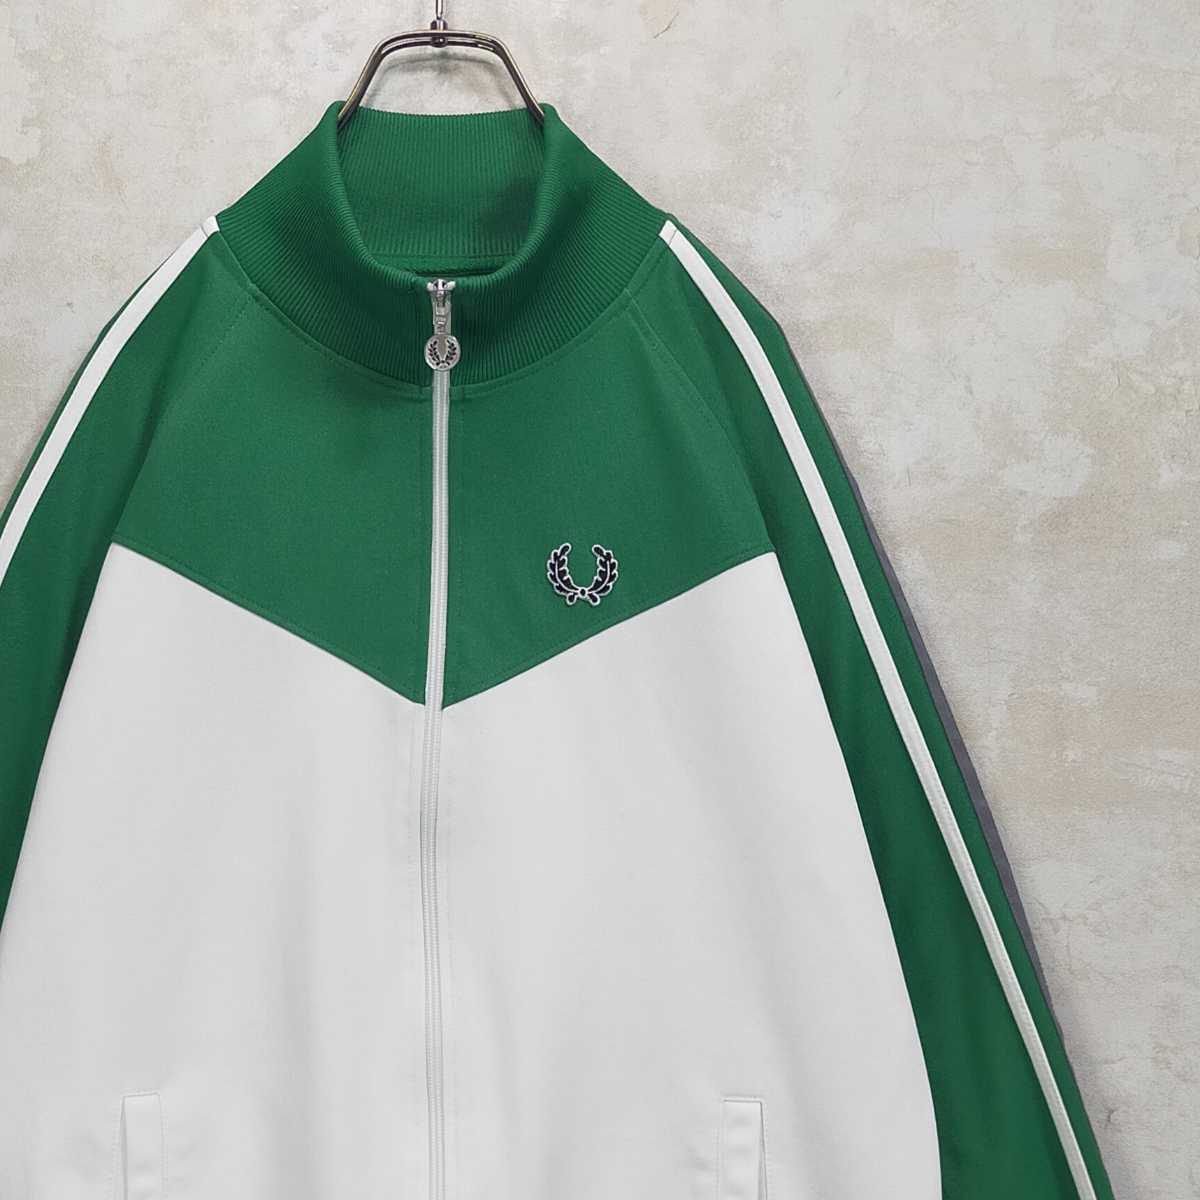 SALE／80%OFF】【SALE／80%OFF】FREDPERRY トラックジャケット ライト 